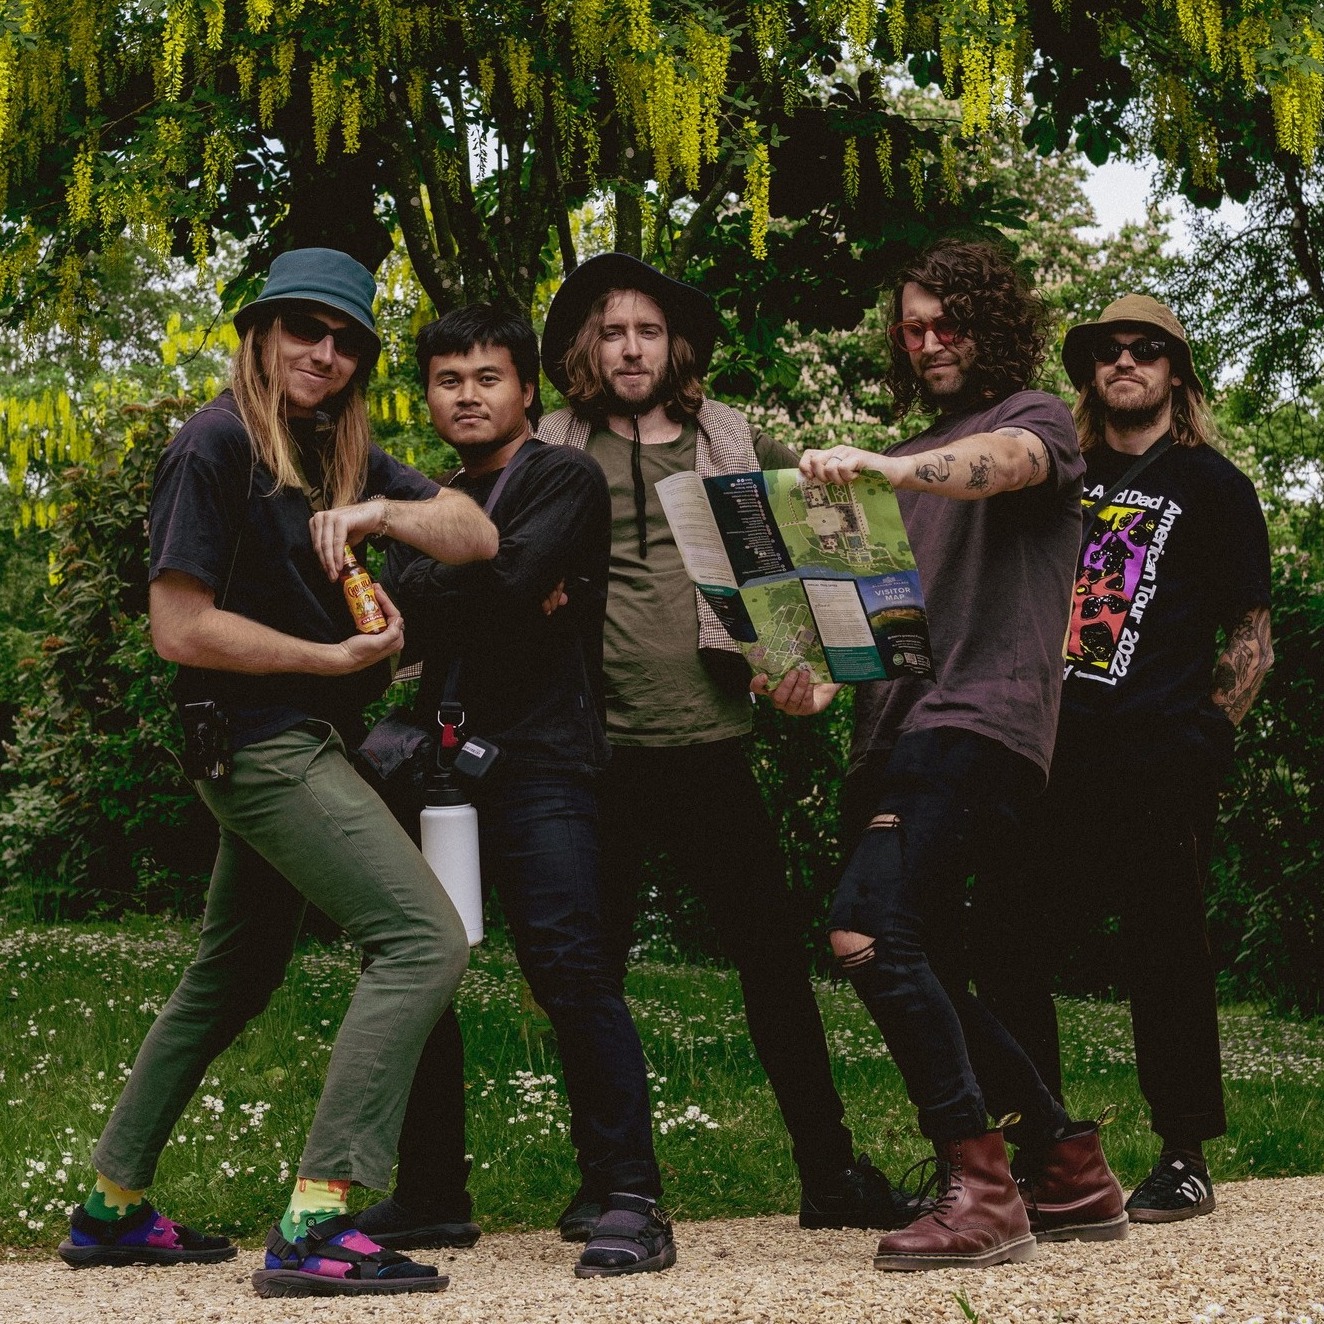 Members of the band standing in a park in front of a tree.